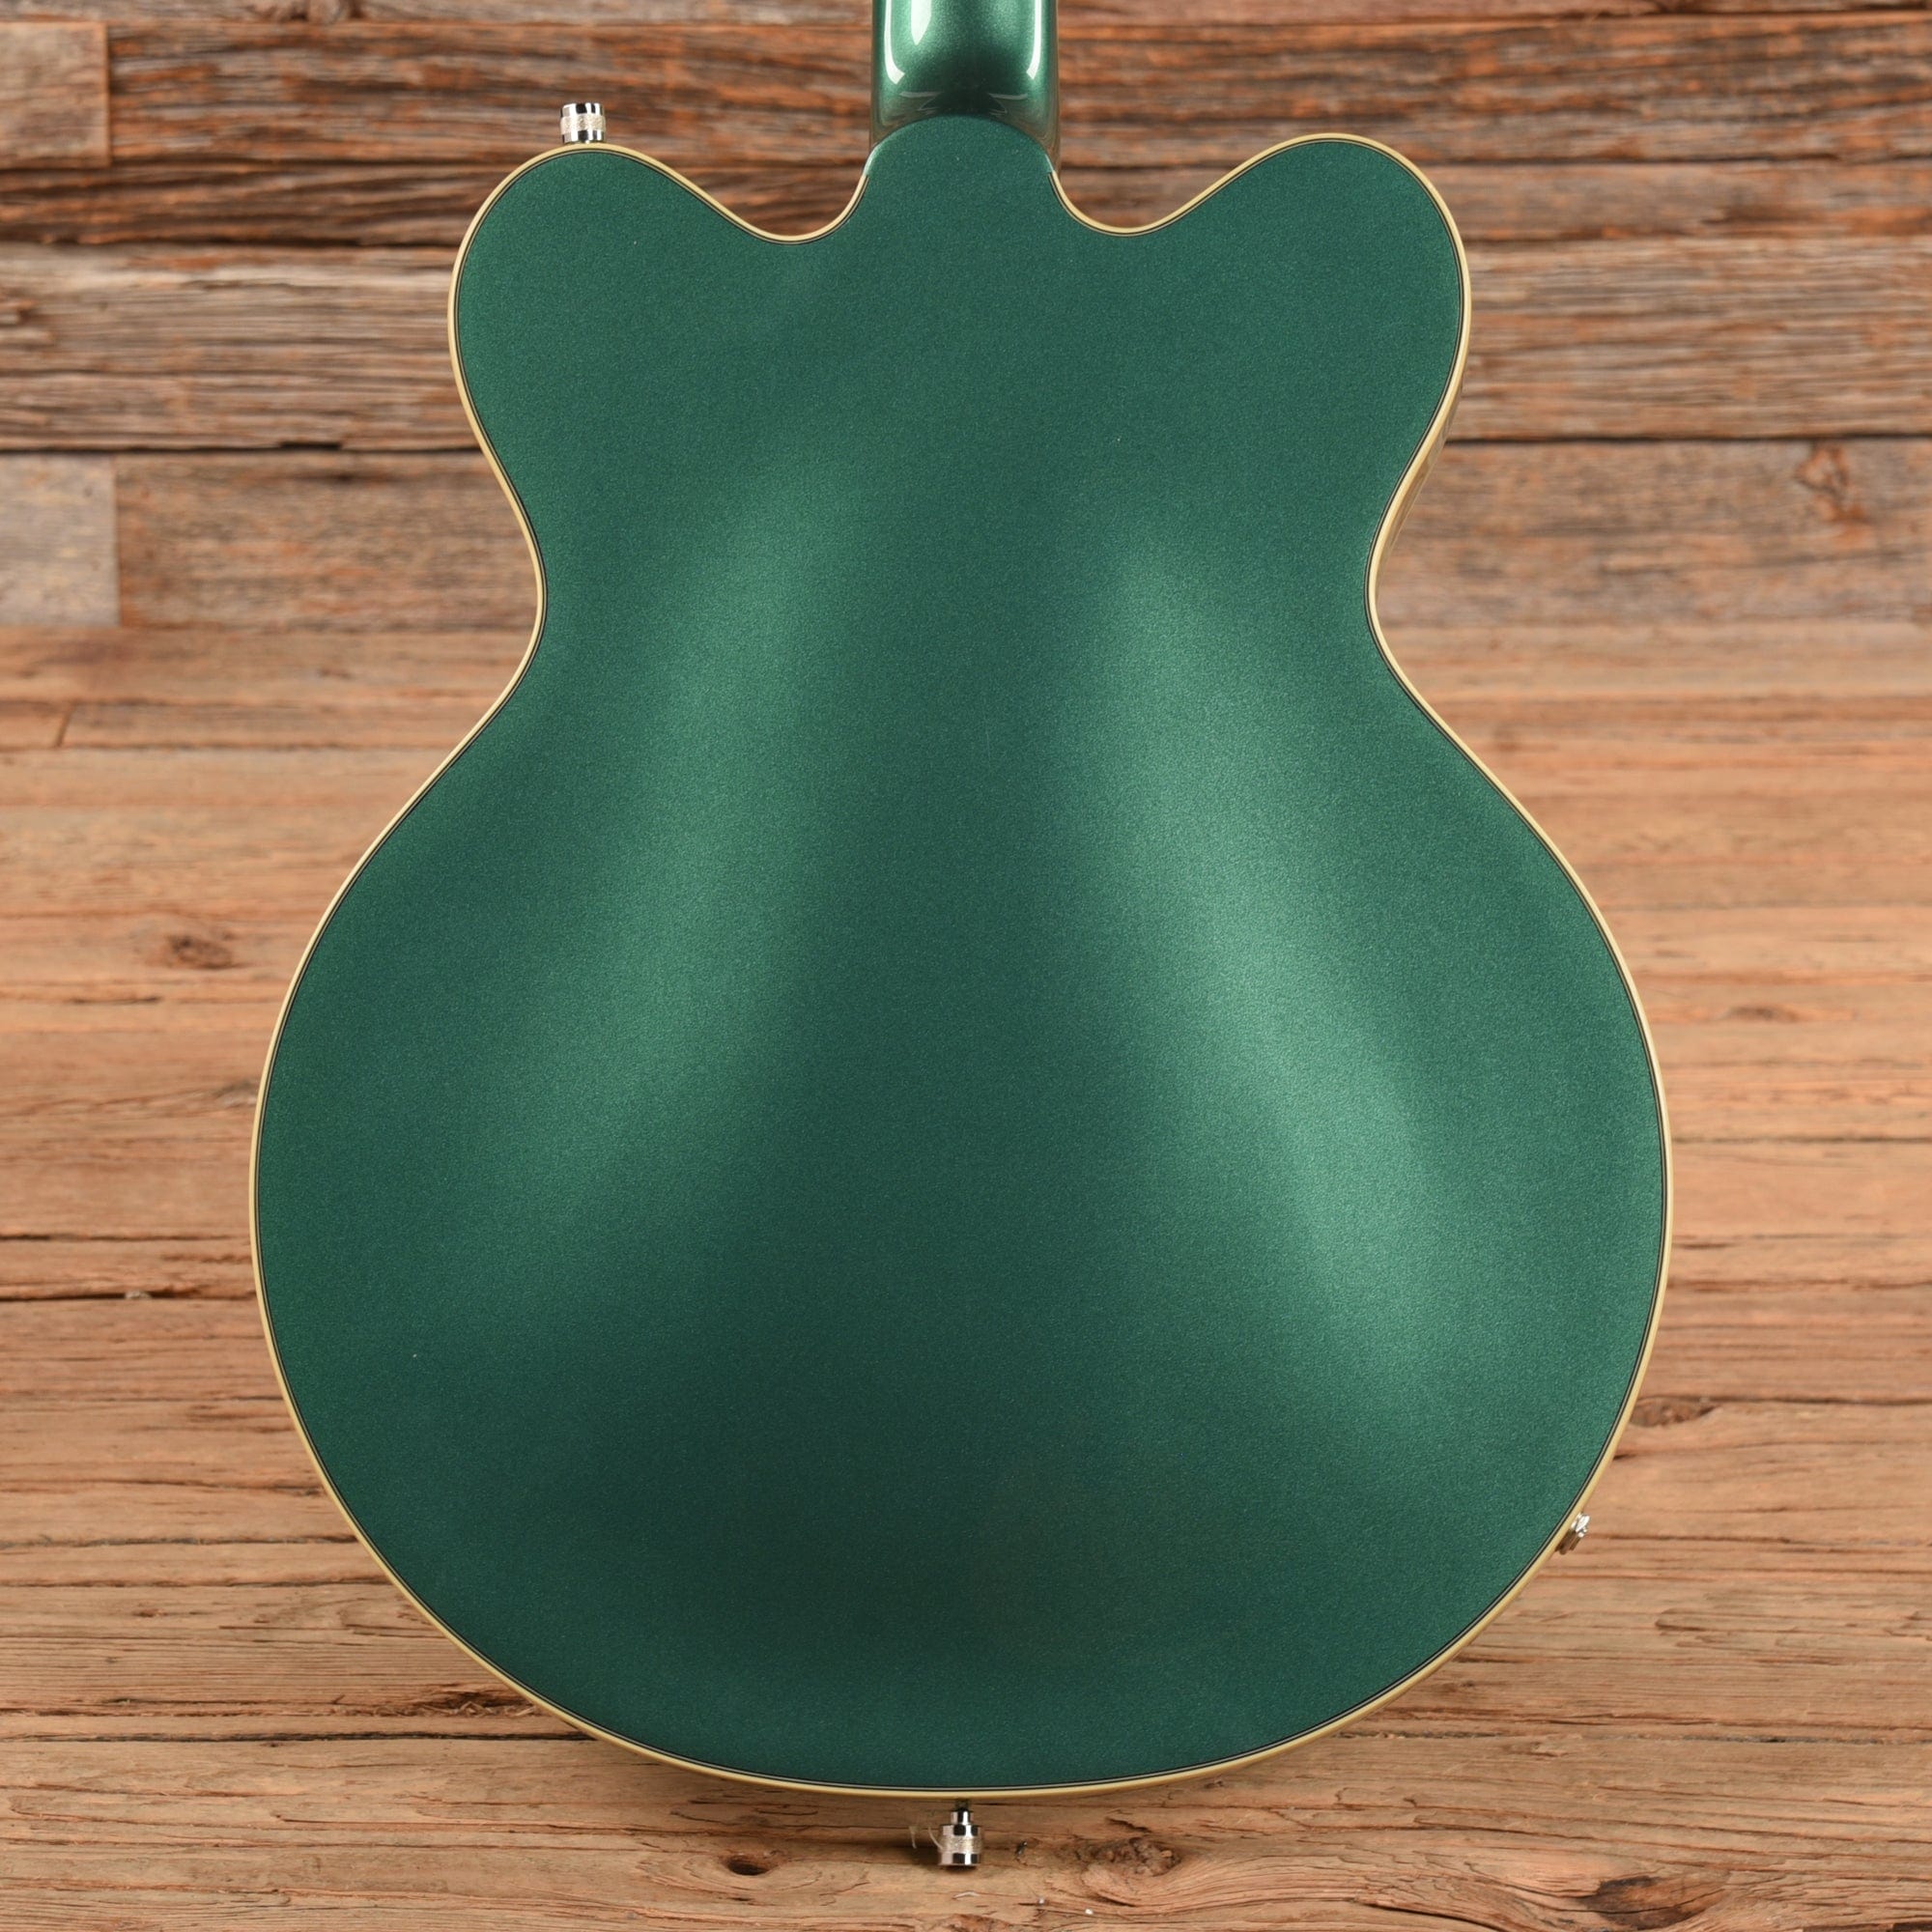 Gretsch G5622LH Electromatic Center Block Double Cutaway with V-Stoptail Georgia Green 2021 Electric Guitars / Semi-Hollow